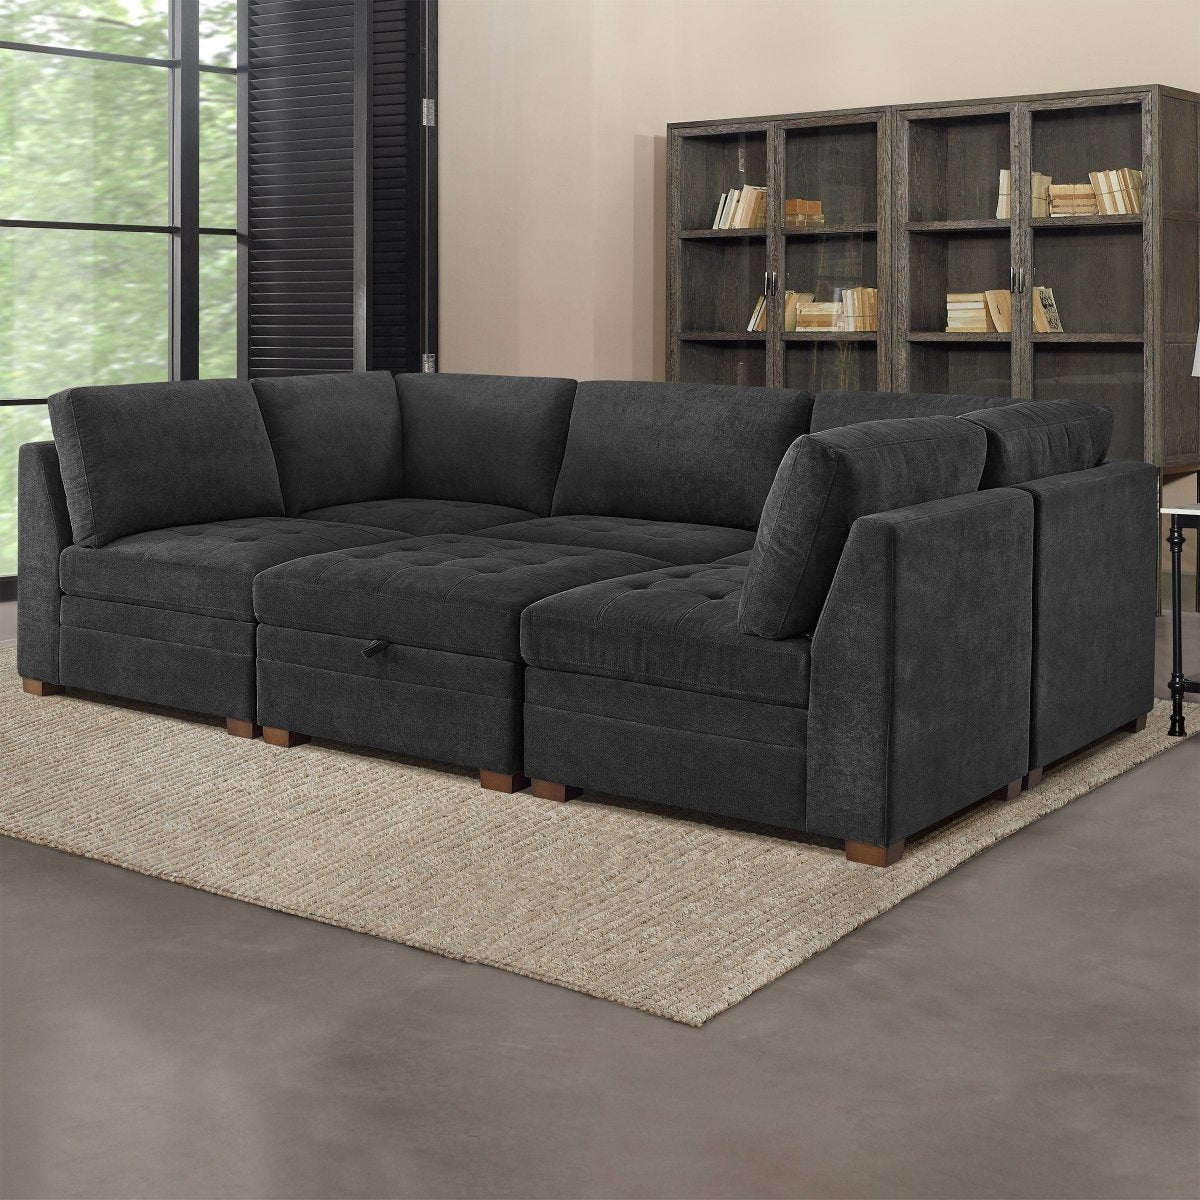 Thomasville Tisdale Fabric Sectional with Storage Ottoman - Alpine Outlets